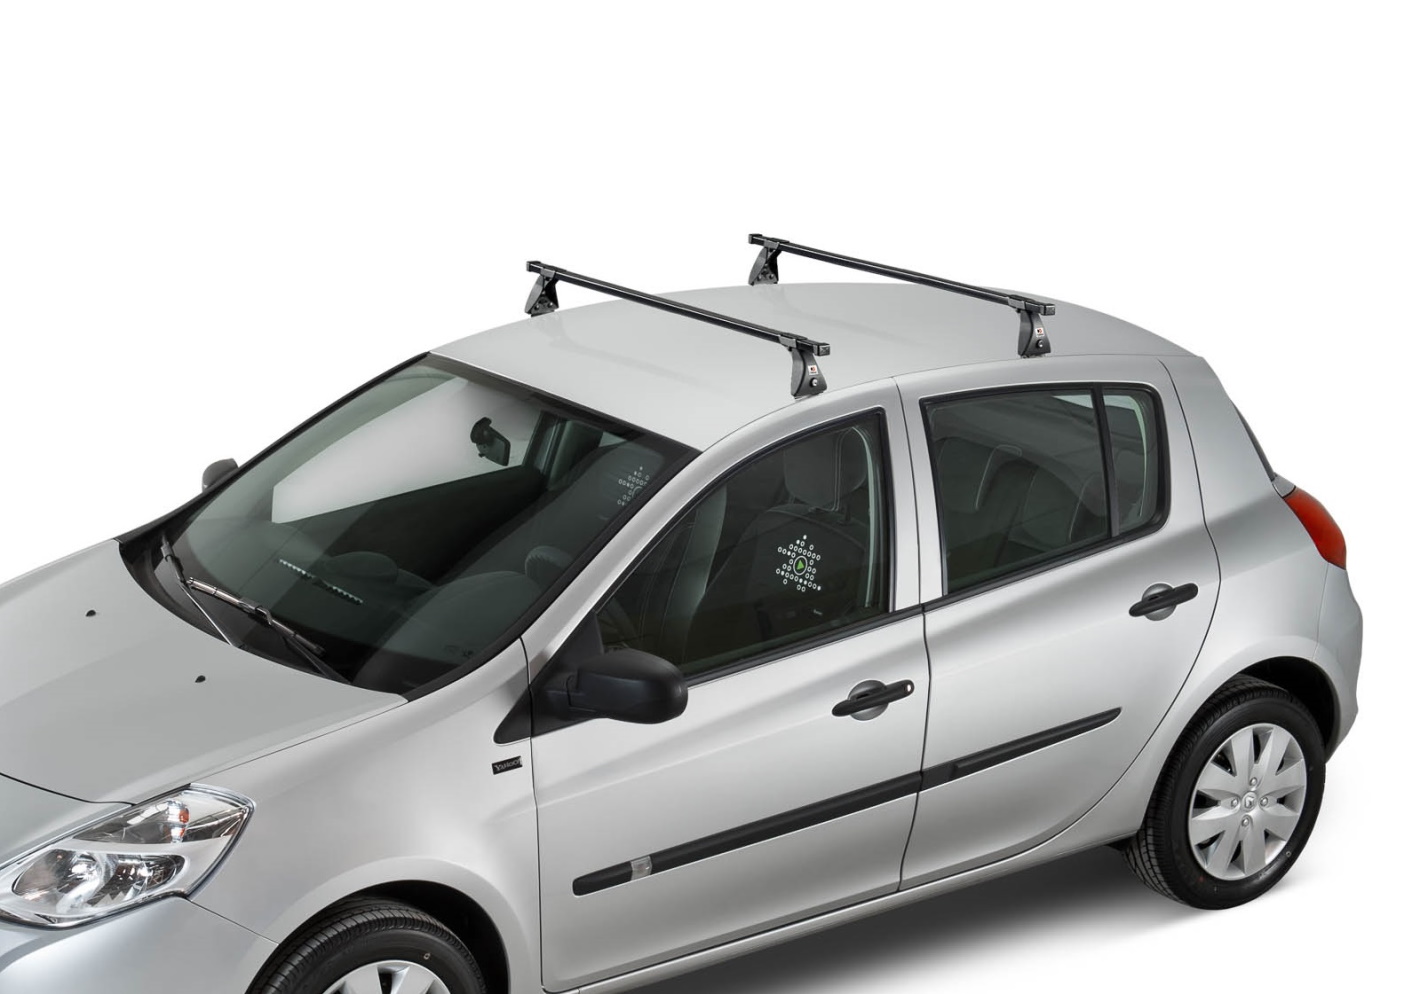 Hyundai i30 five door (2012 to 2017):FIRRAK 115cm X roof bars with fitting kit 2053